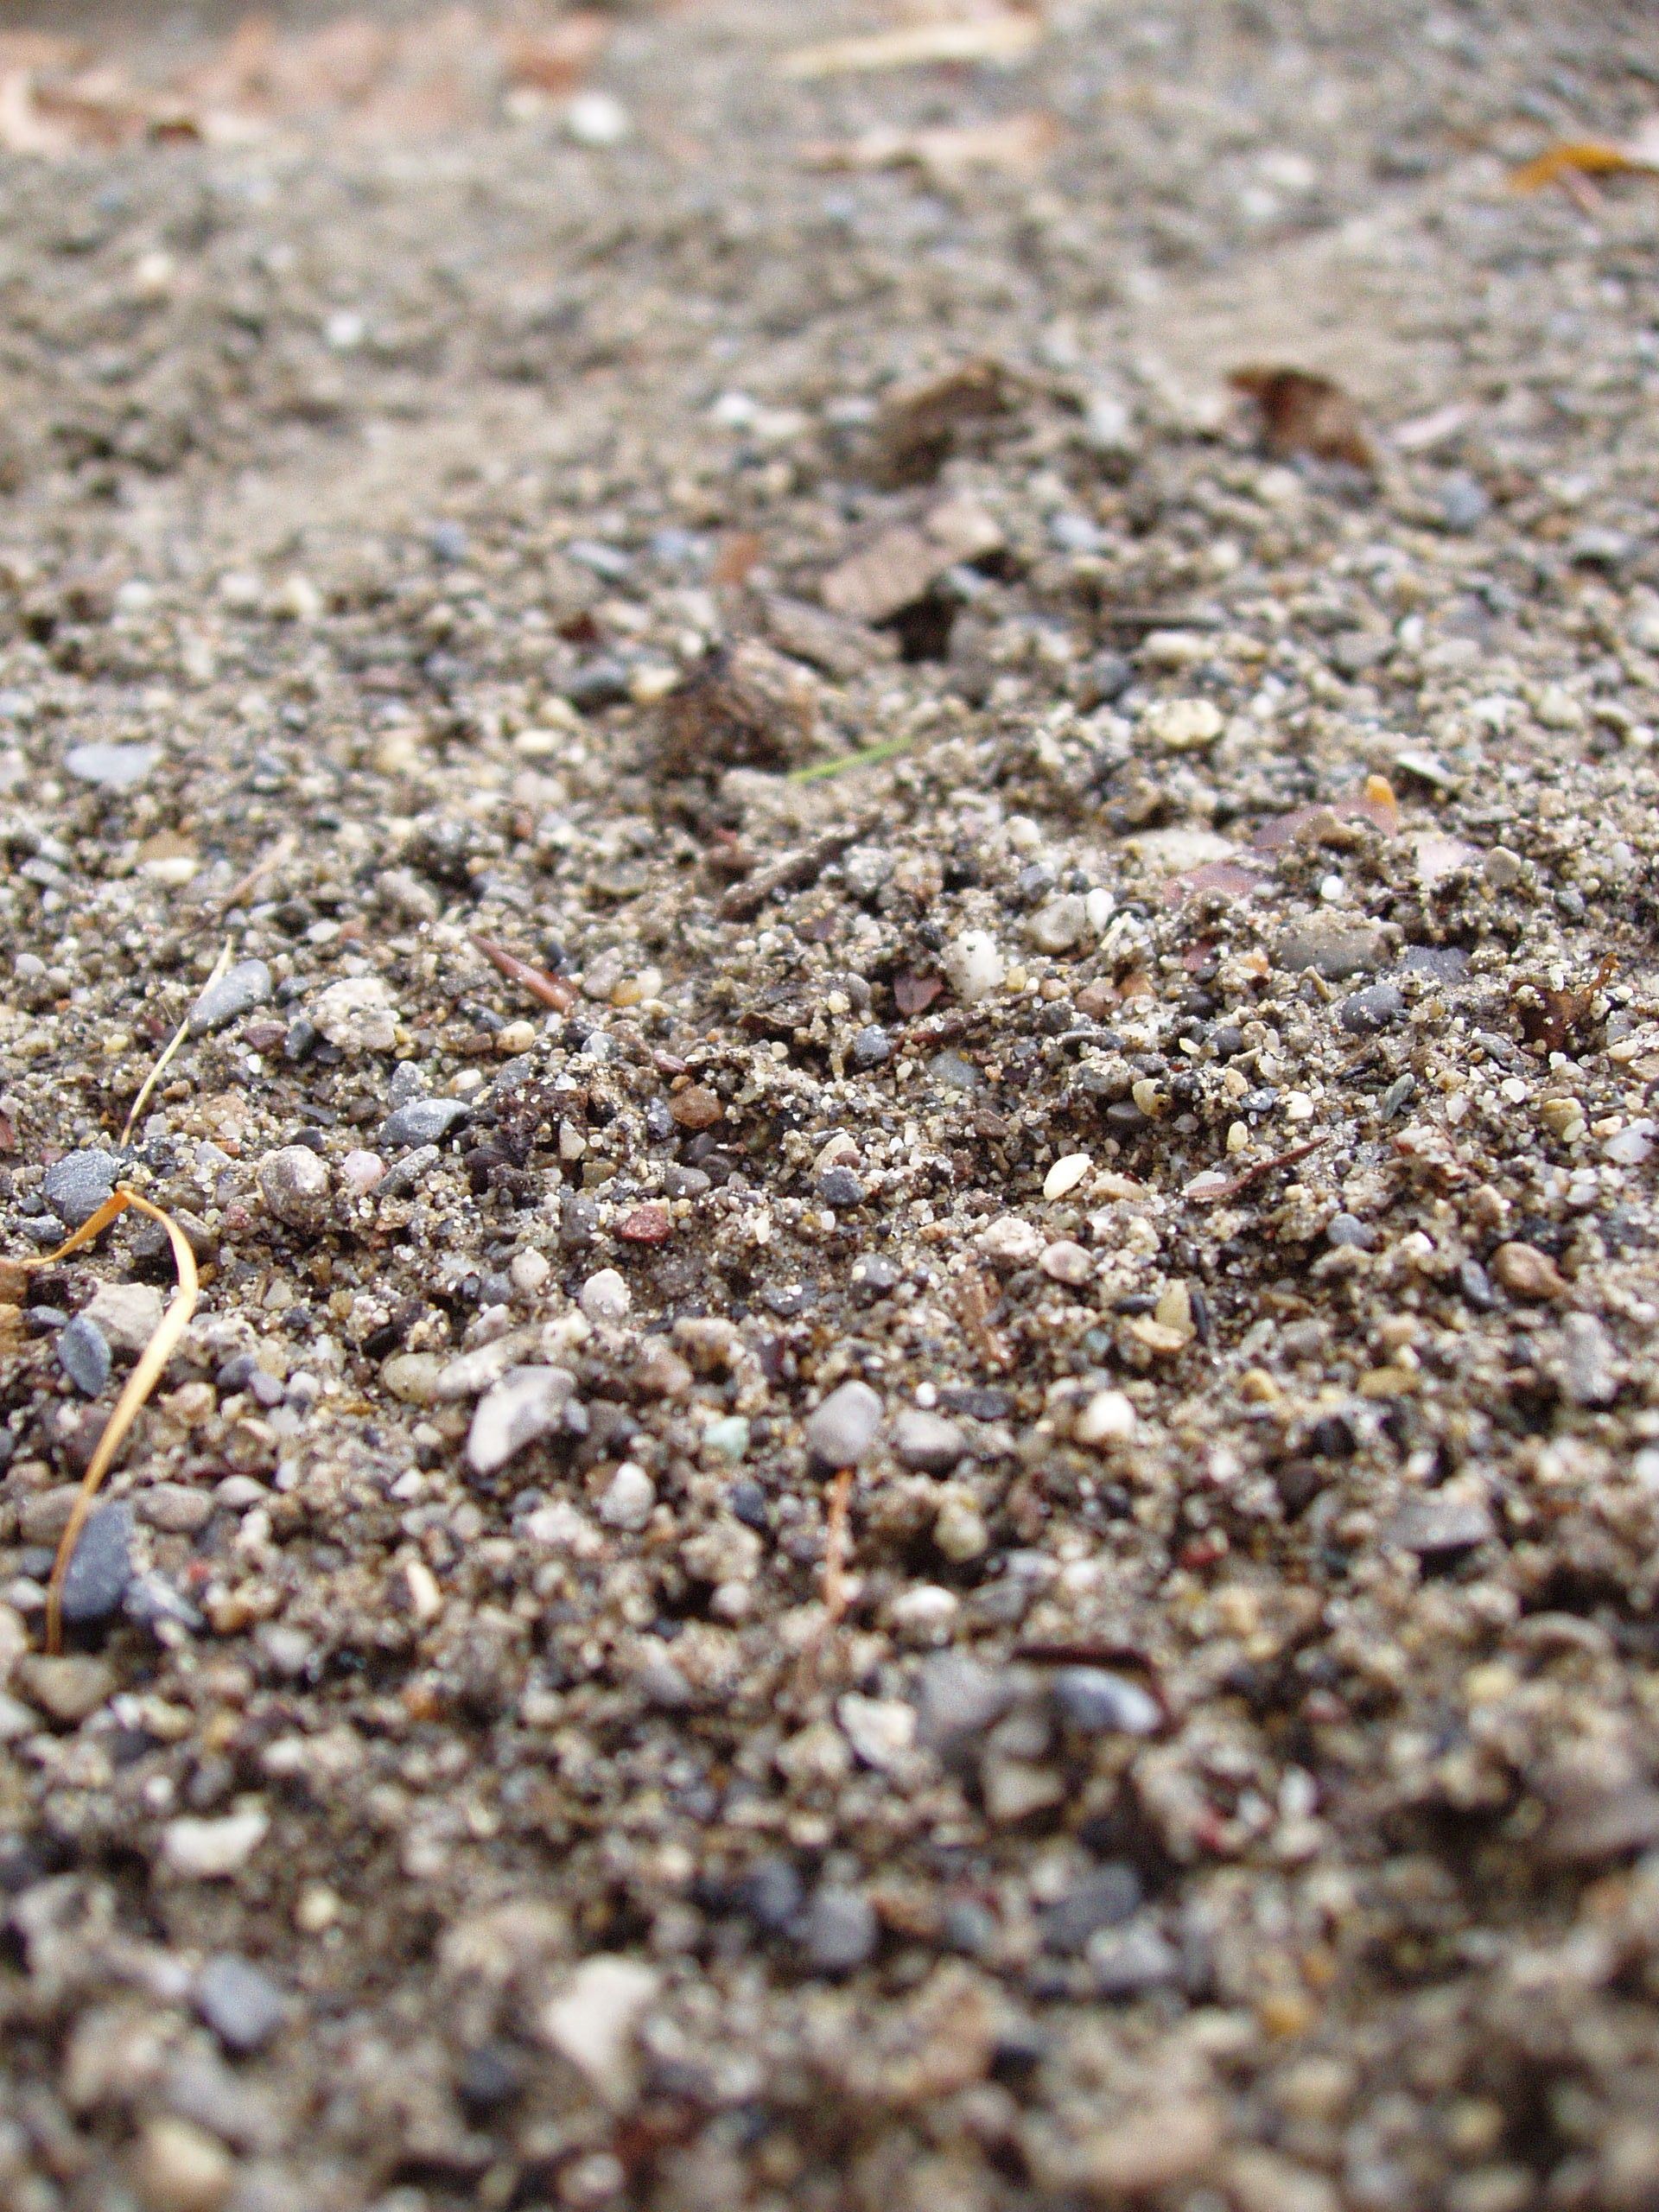 A patch of gravel on a dirt road.